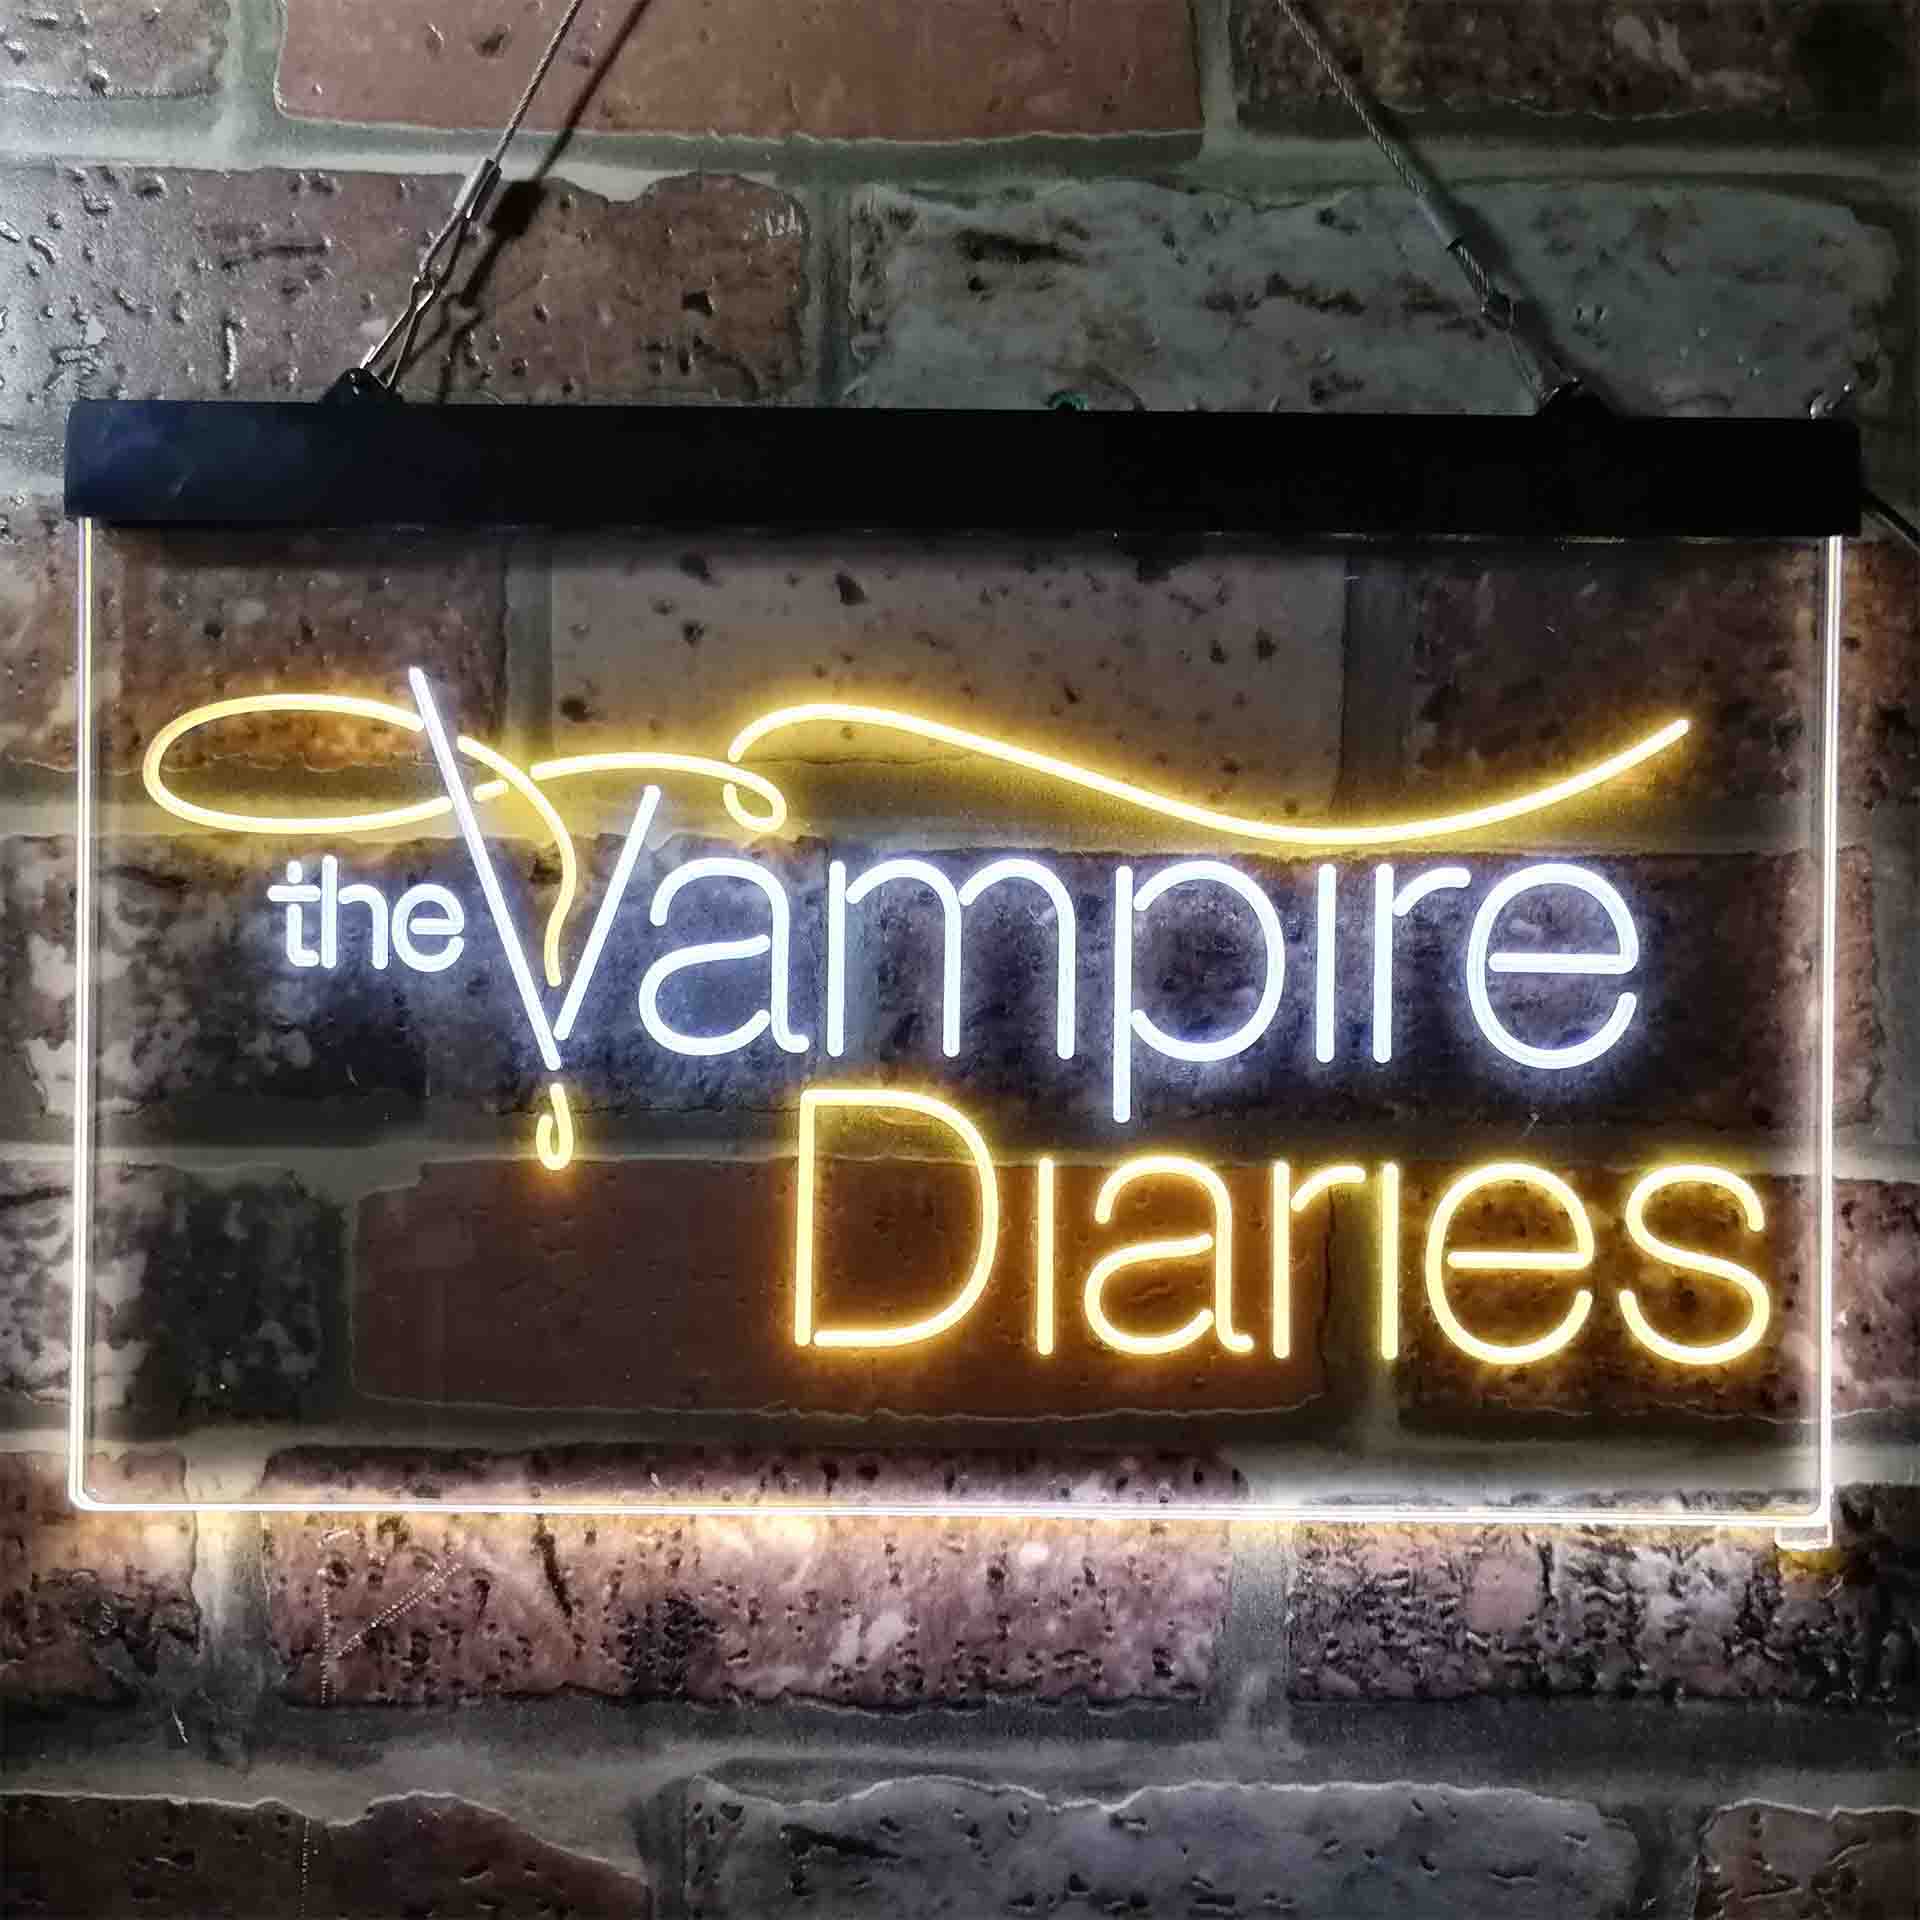 The Vampire Diaries Neon LED Sign